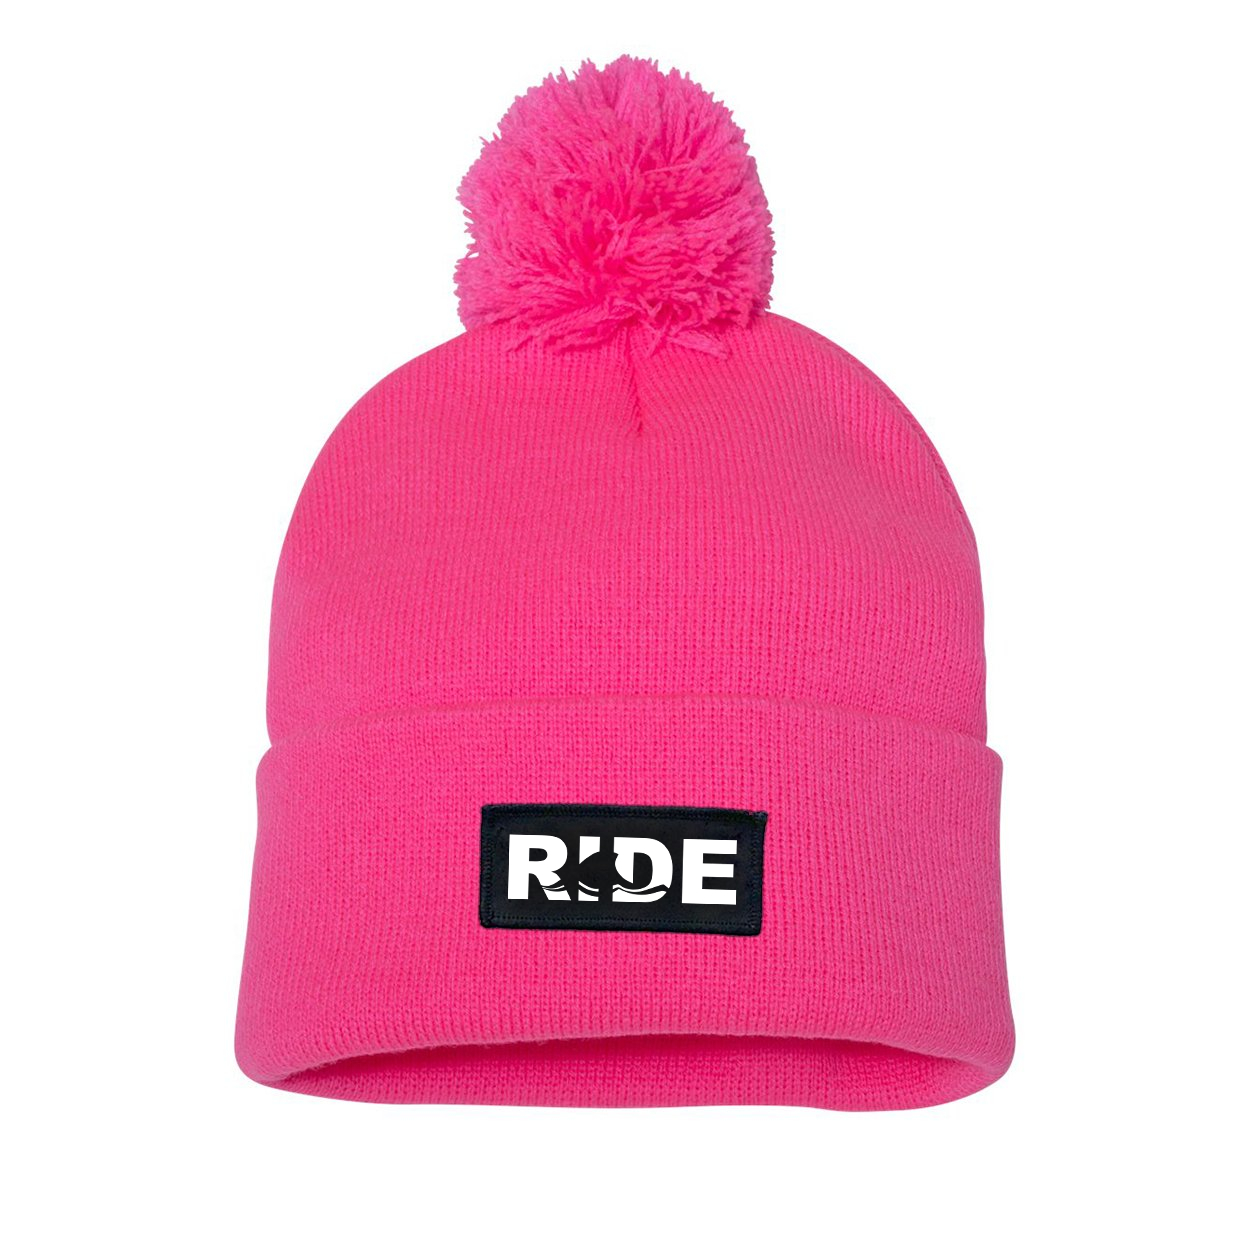 Ride Wave Logo Night Out Woven Patch Roll Up Pom Knit Beanie Pink (White Logo)